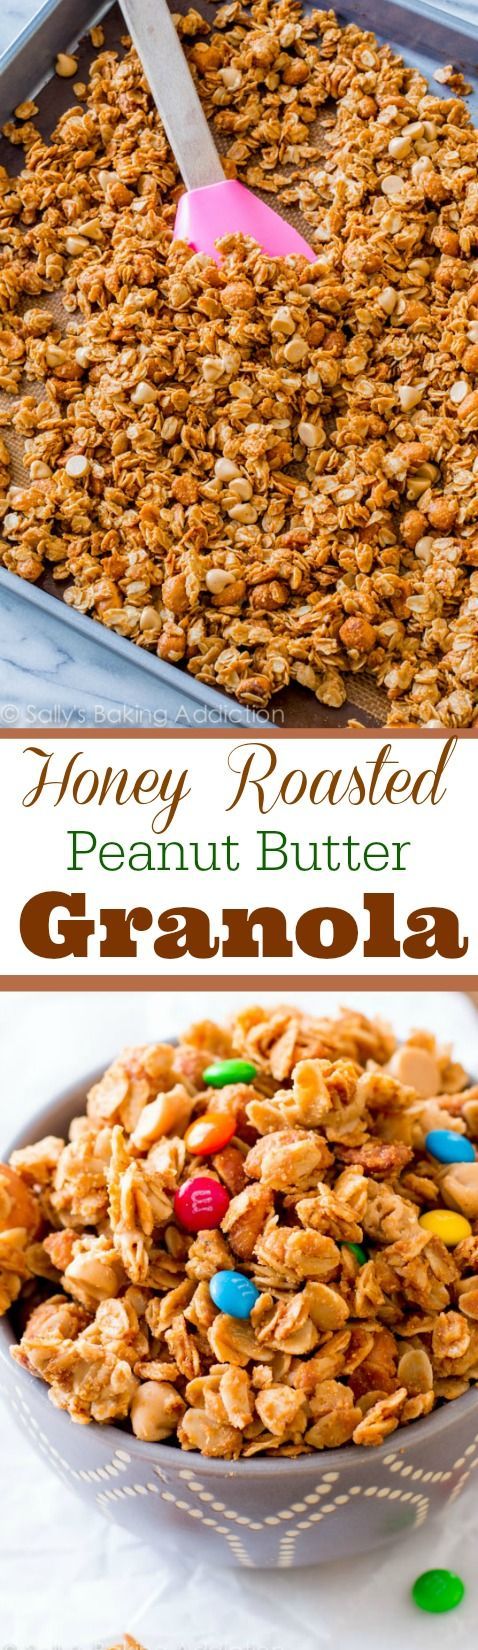 If you like peanut butter and honey, this easy and healthy 7 ingredient granola is for you!!